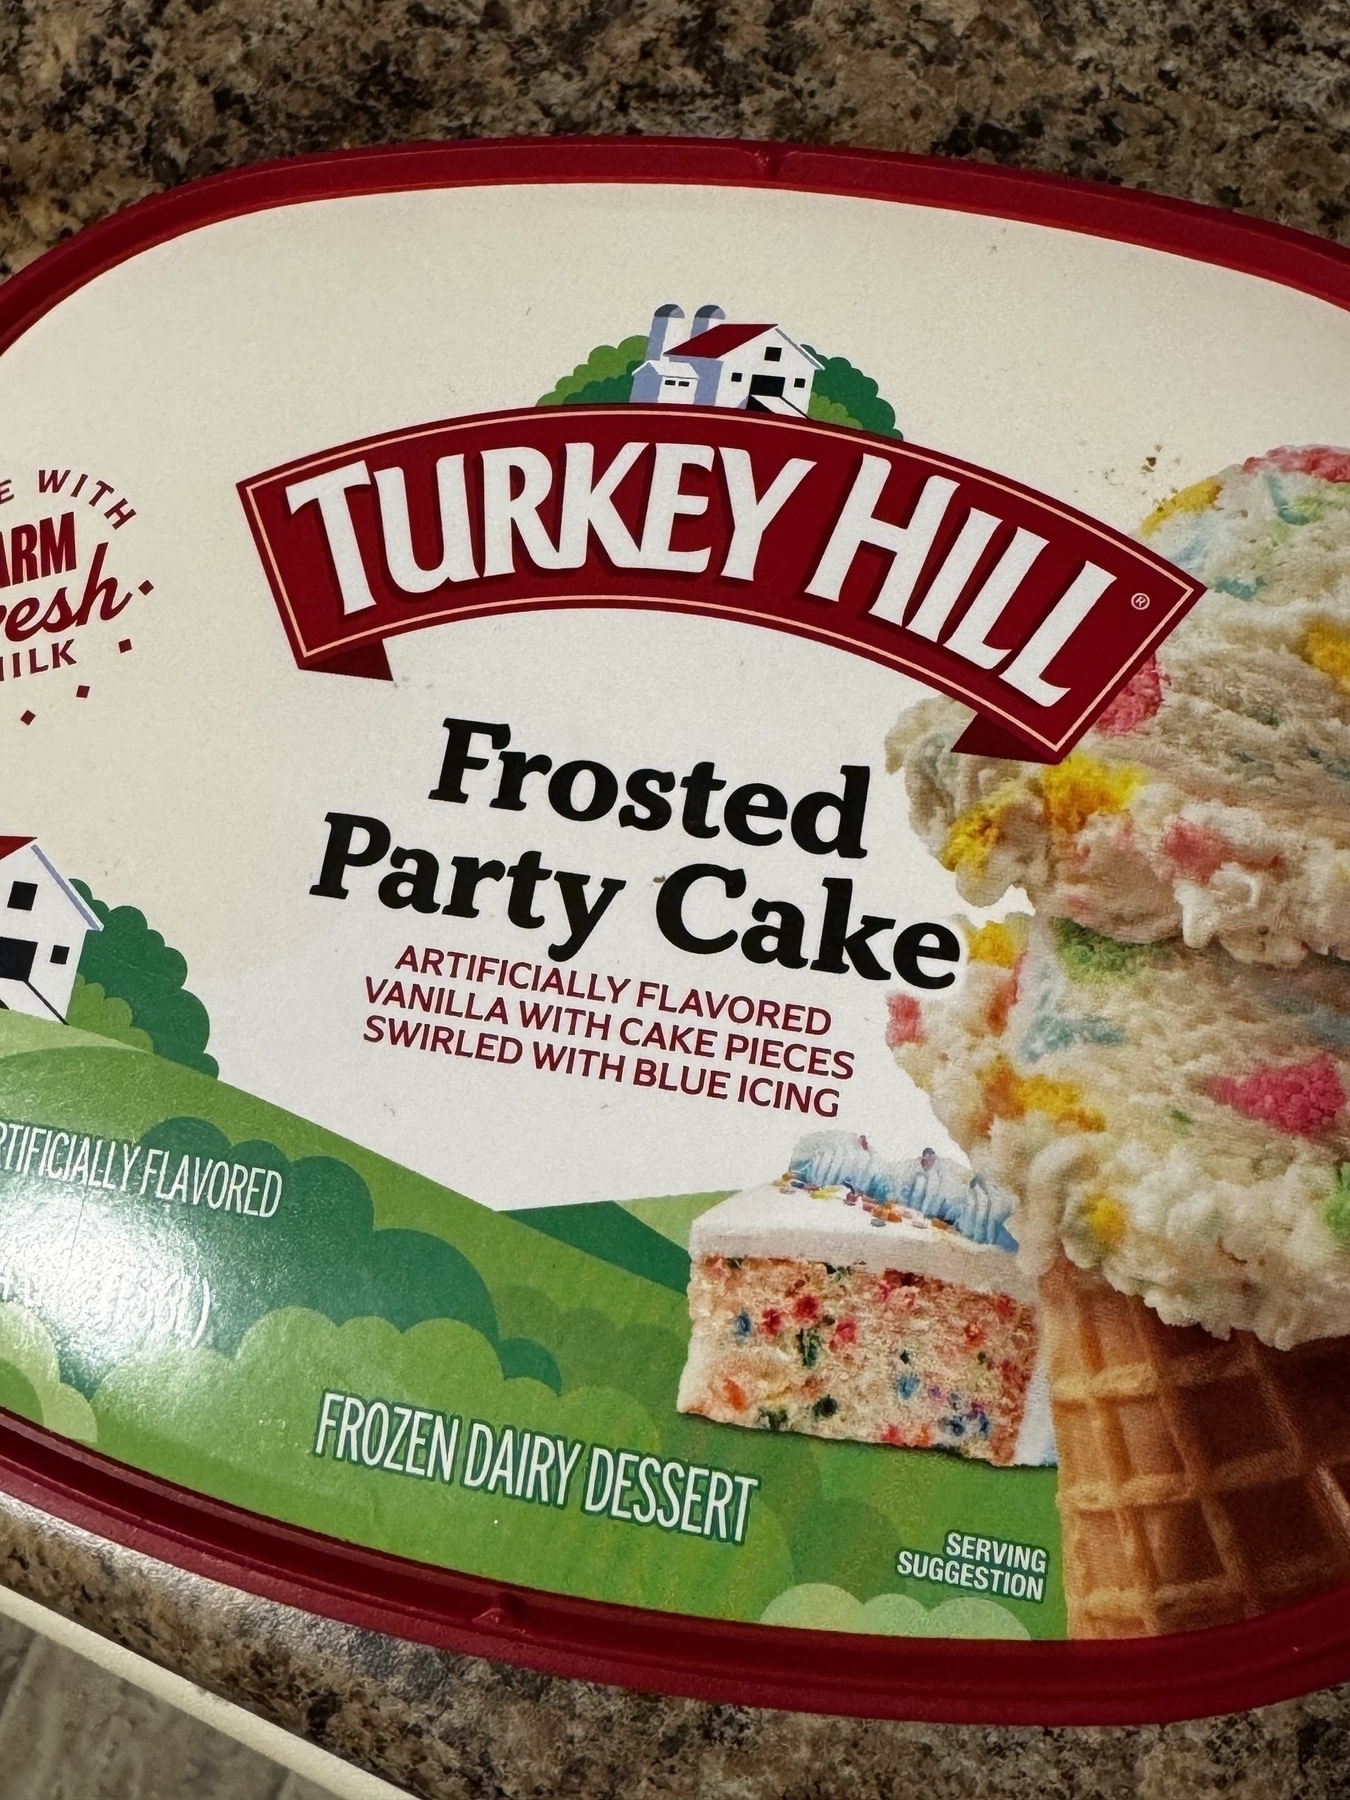 Container of Turkey Hill Frosted Party Cake flavored frozen dairy dessert with an image of the product on the label.